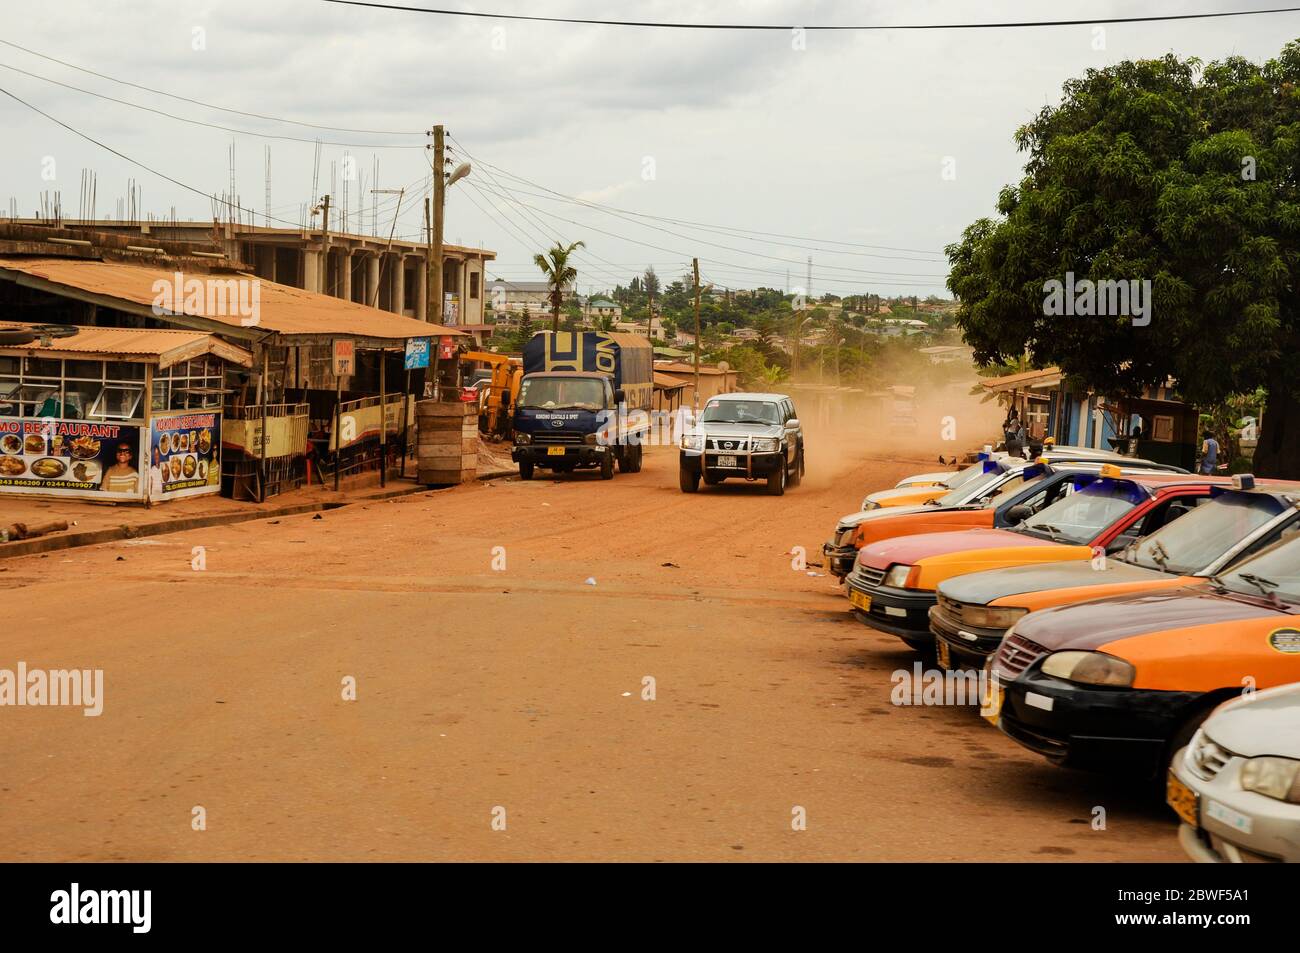 A dirt and gravel road leading through a poor african village - Accra, Ghana, Africa Stock Photo